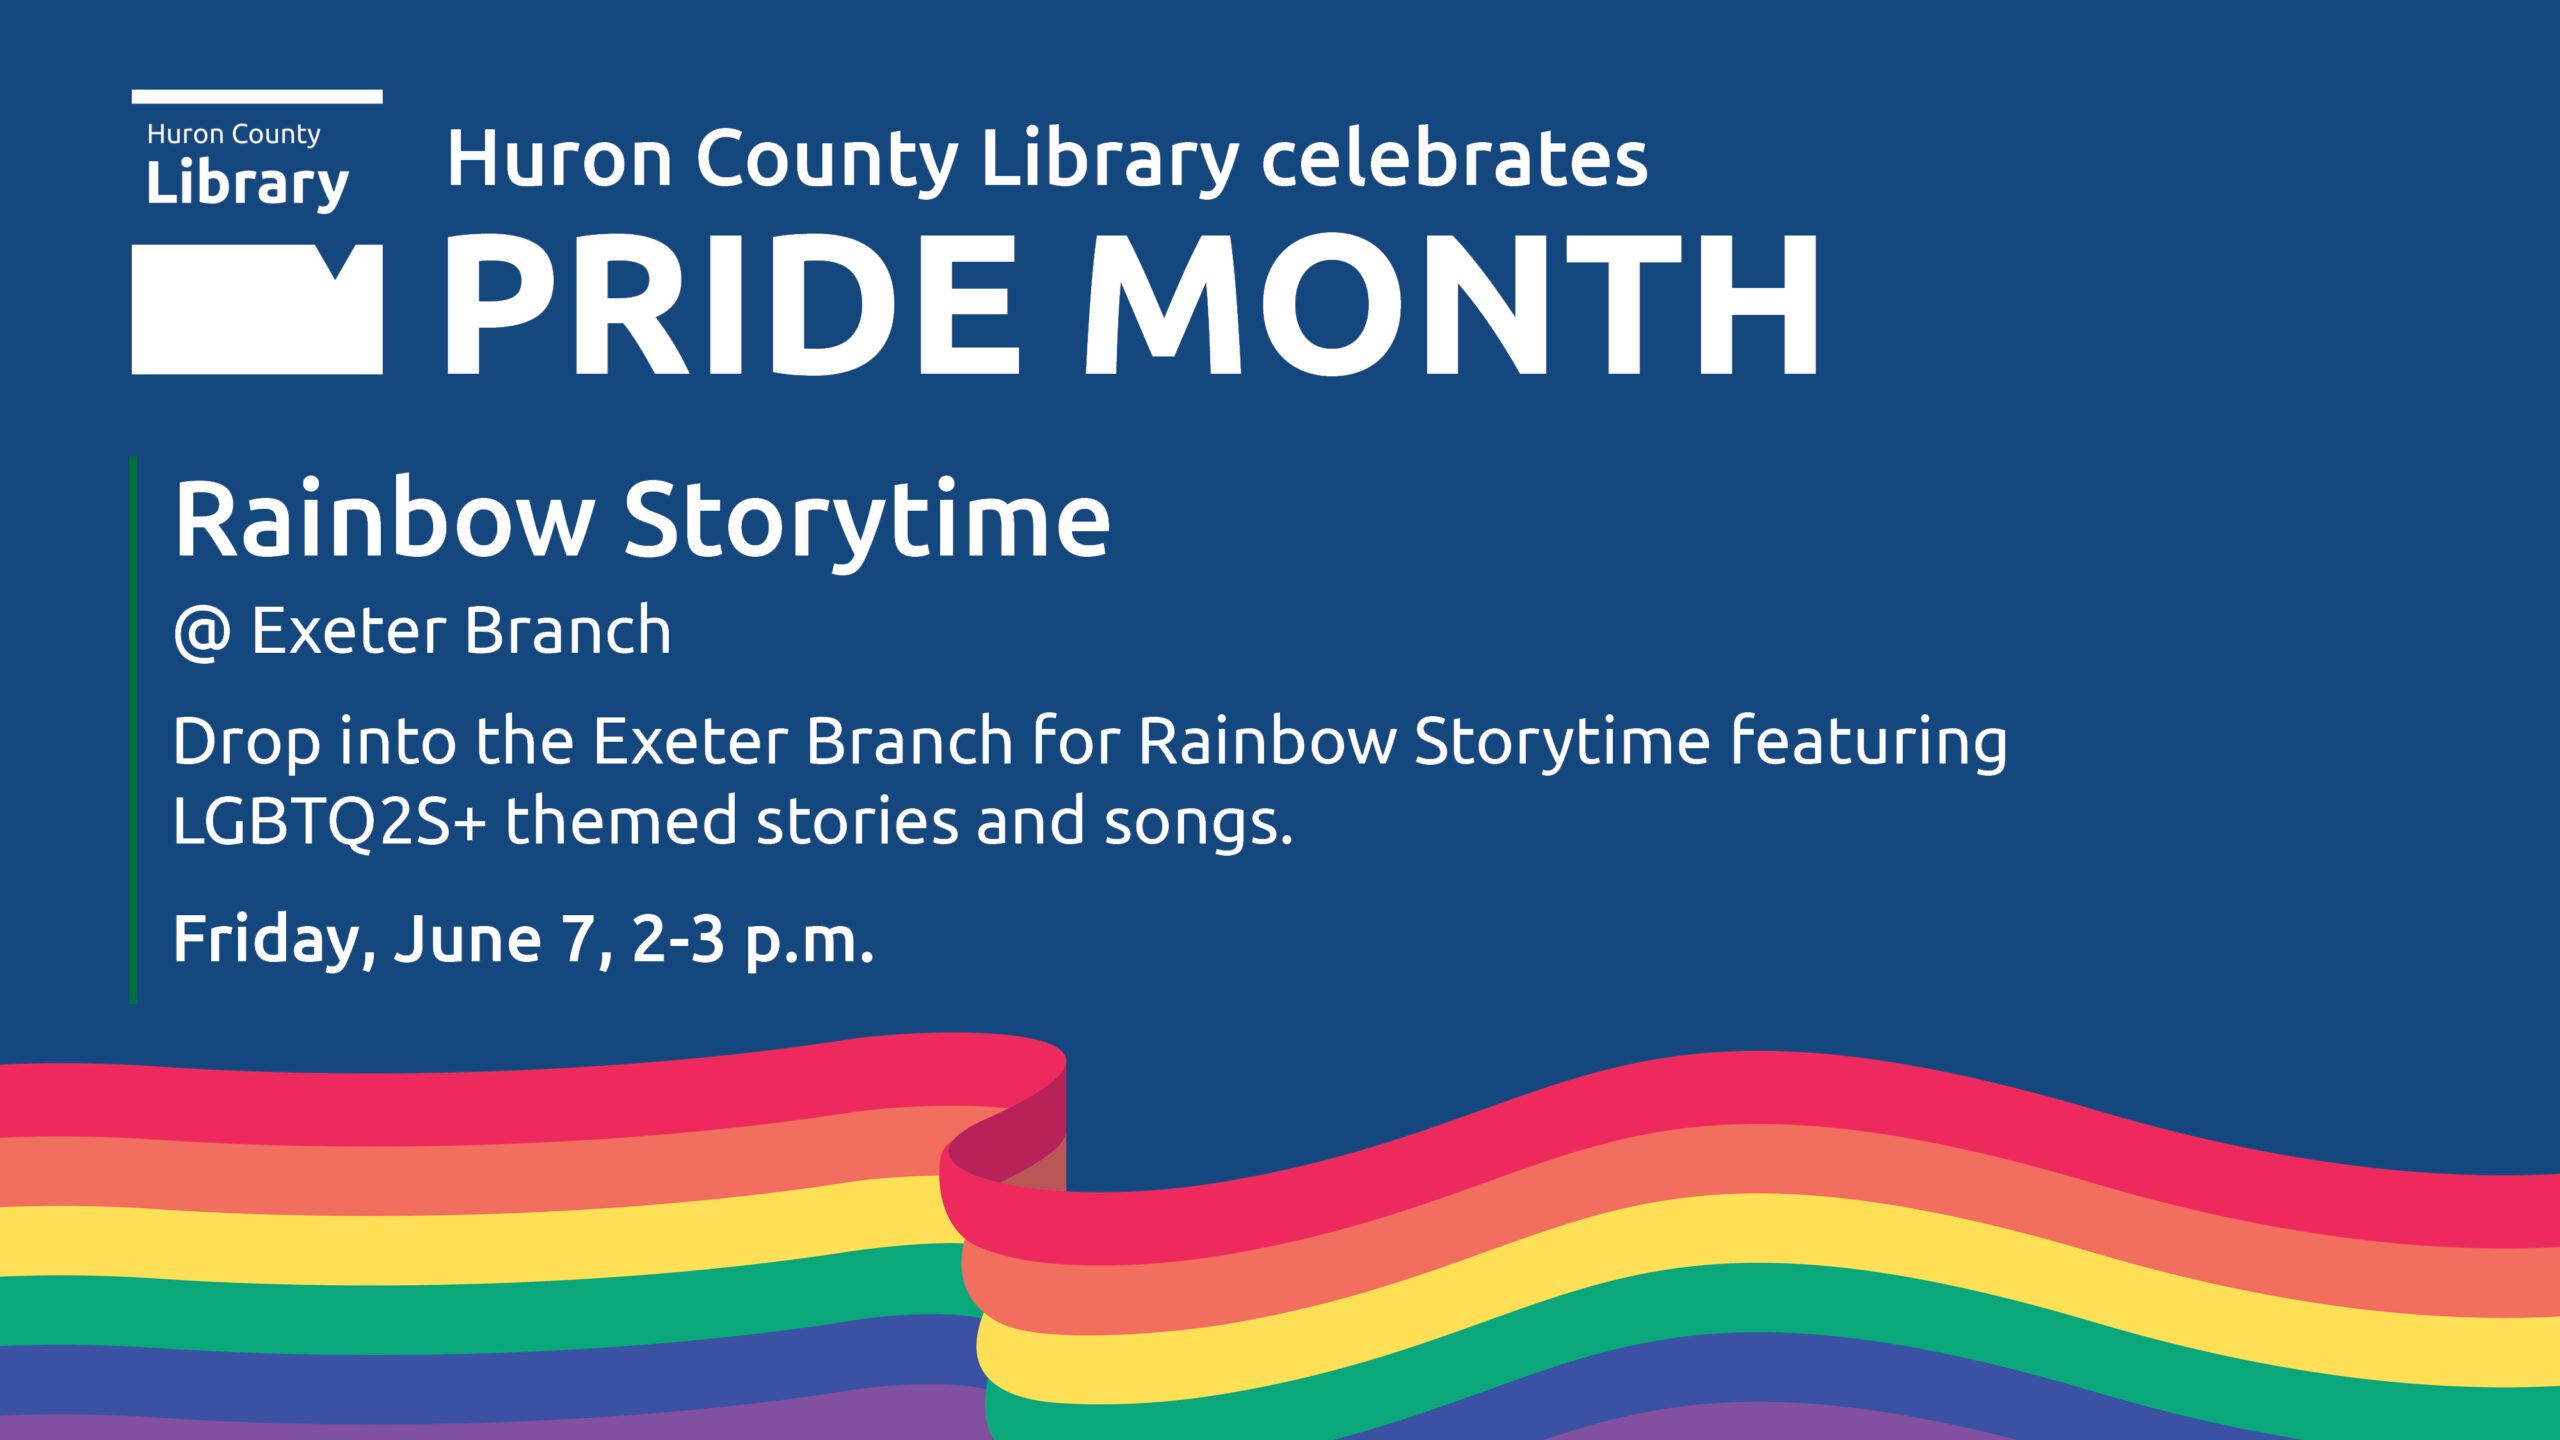 Illustration of a rainbow with text promoting Pride Month Rainbow Storytime at Exeter